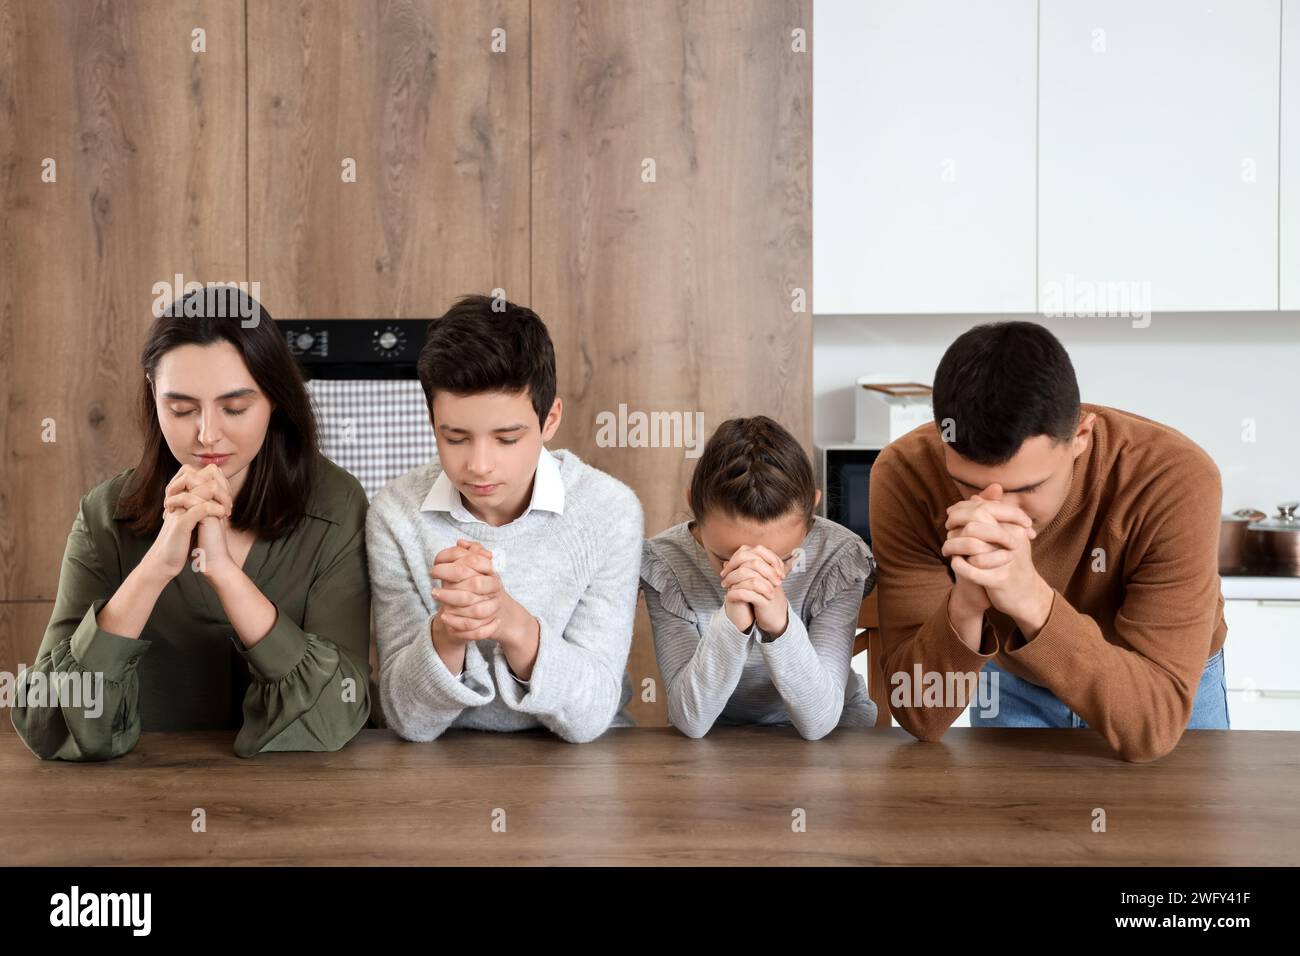 Family praying together at table in kitchen Stock Photo